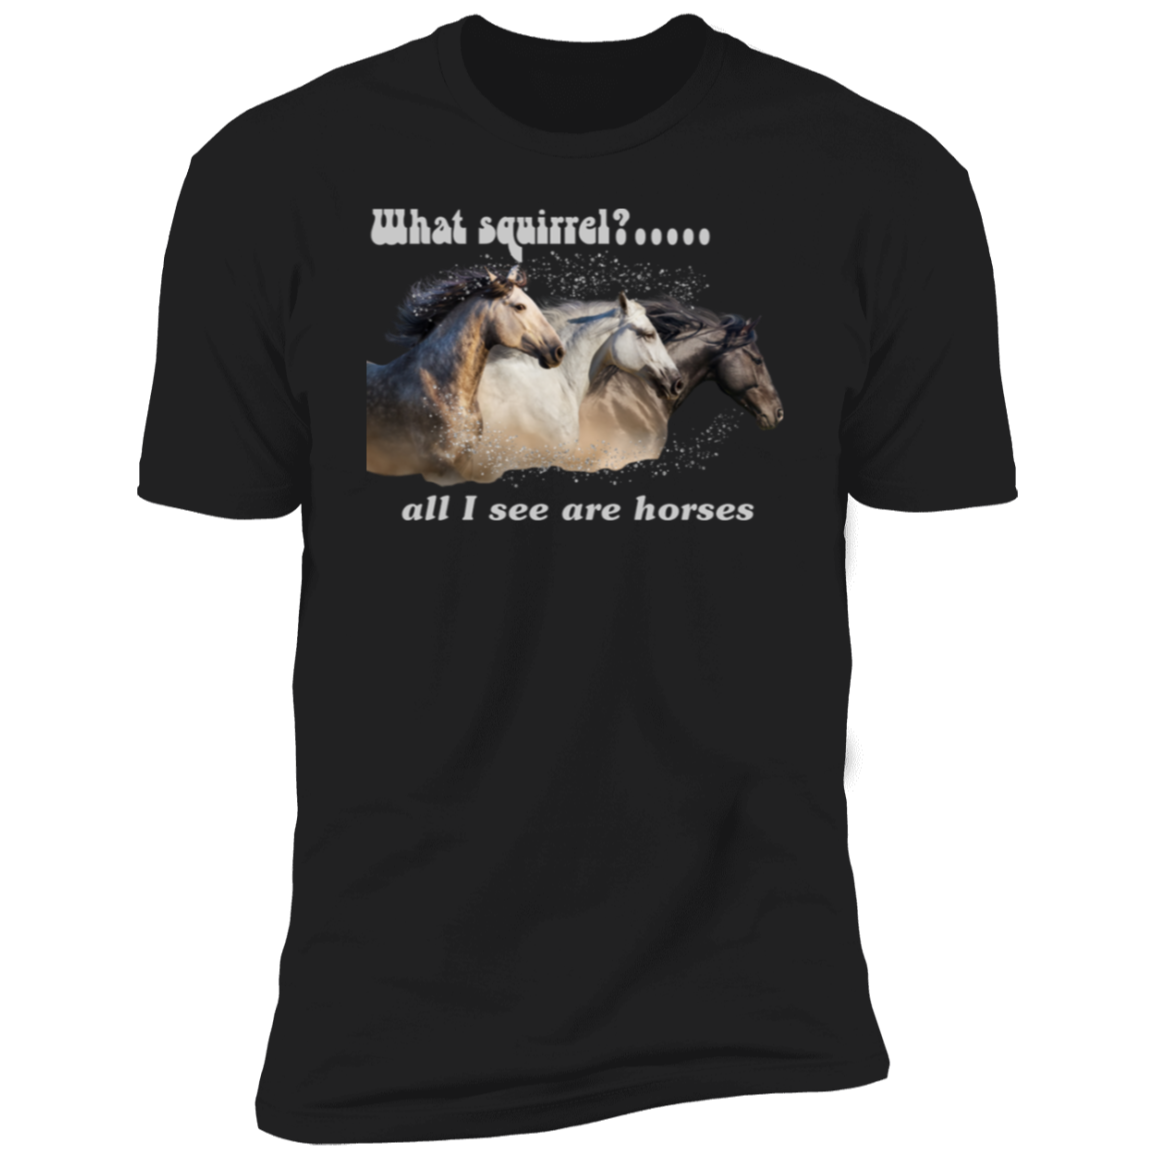 What Squirrel? Funny T-Shirt Unisex